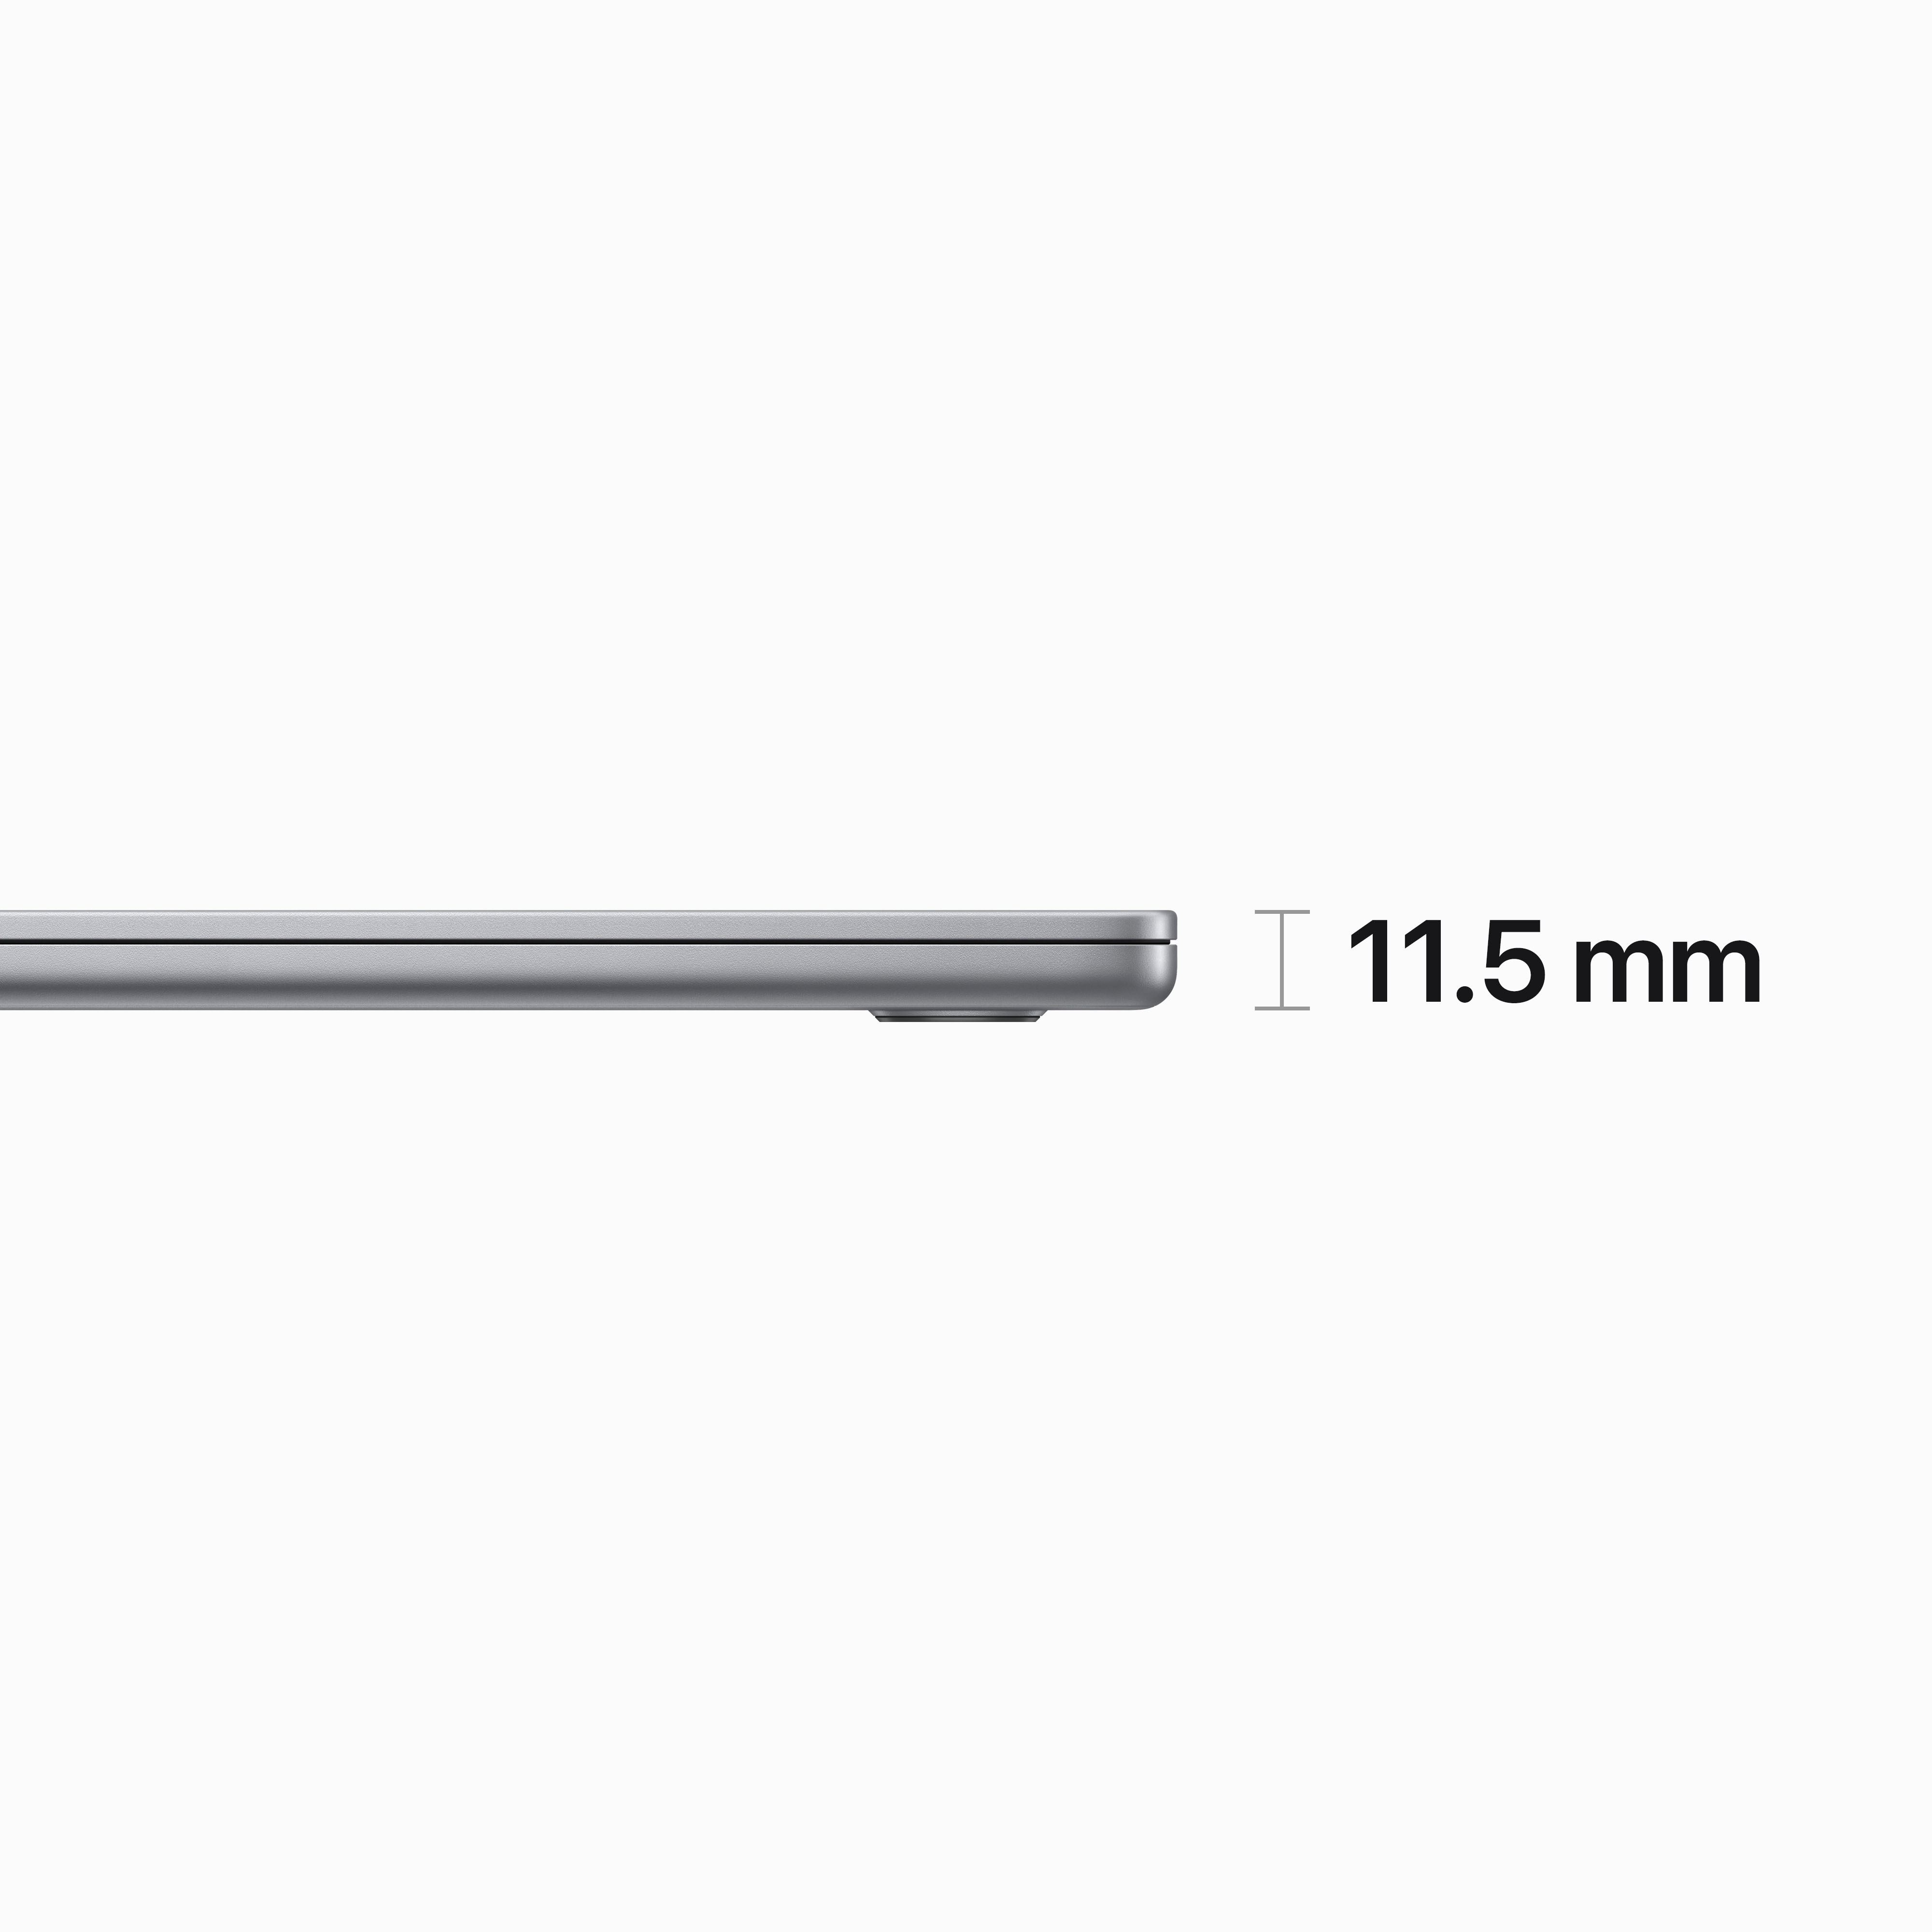 Apple (Latest Model) Laptop Space Best M2 - Gray Air Memory Buy MQKQ3LL/A MacBook 512GB SSD chip 15\